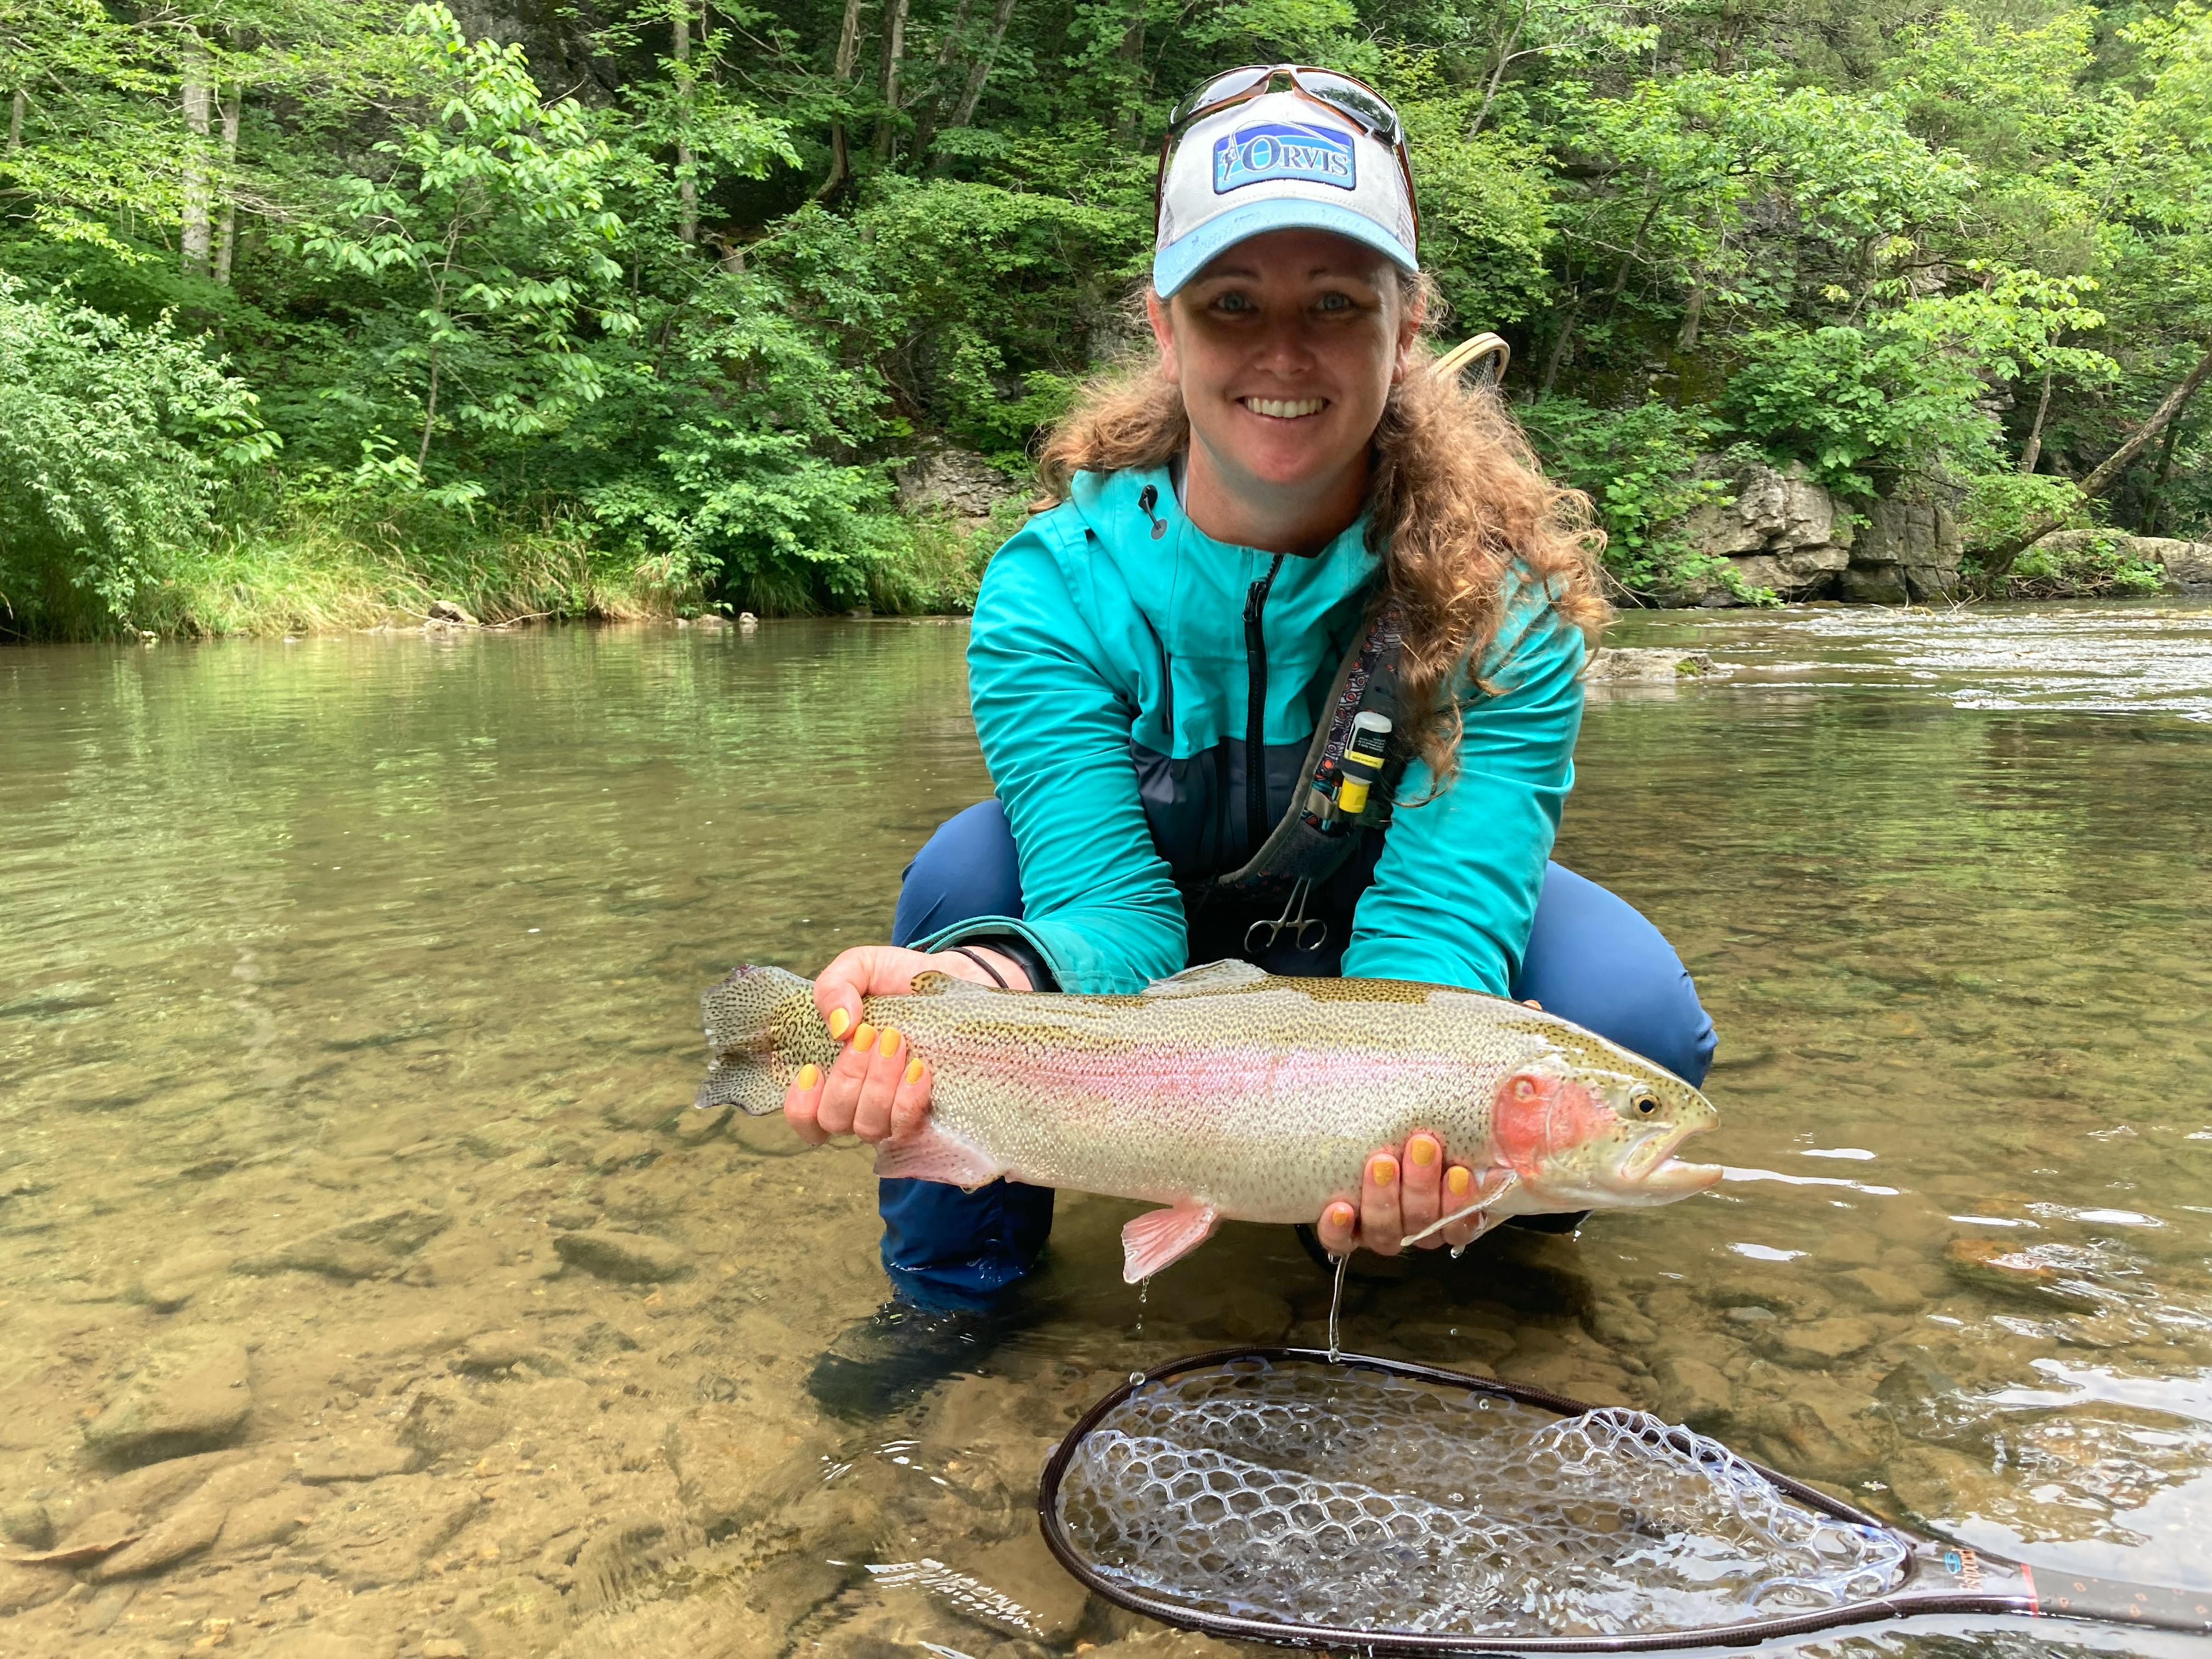 The author squats above a creek in waders while holding a large brown trout out of the water above her floating net. She has a big smile on her face.